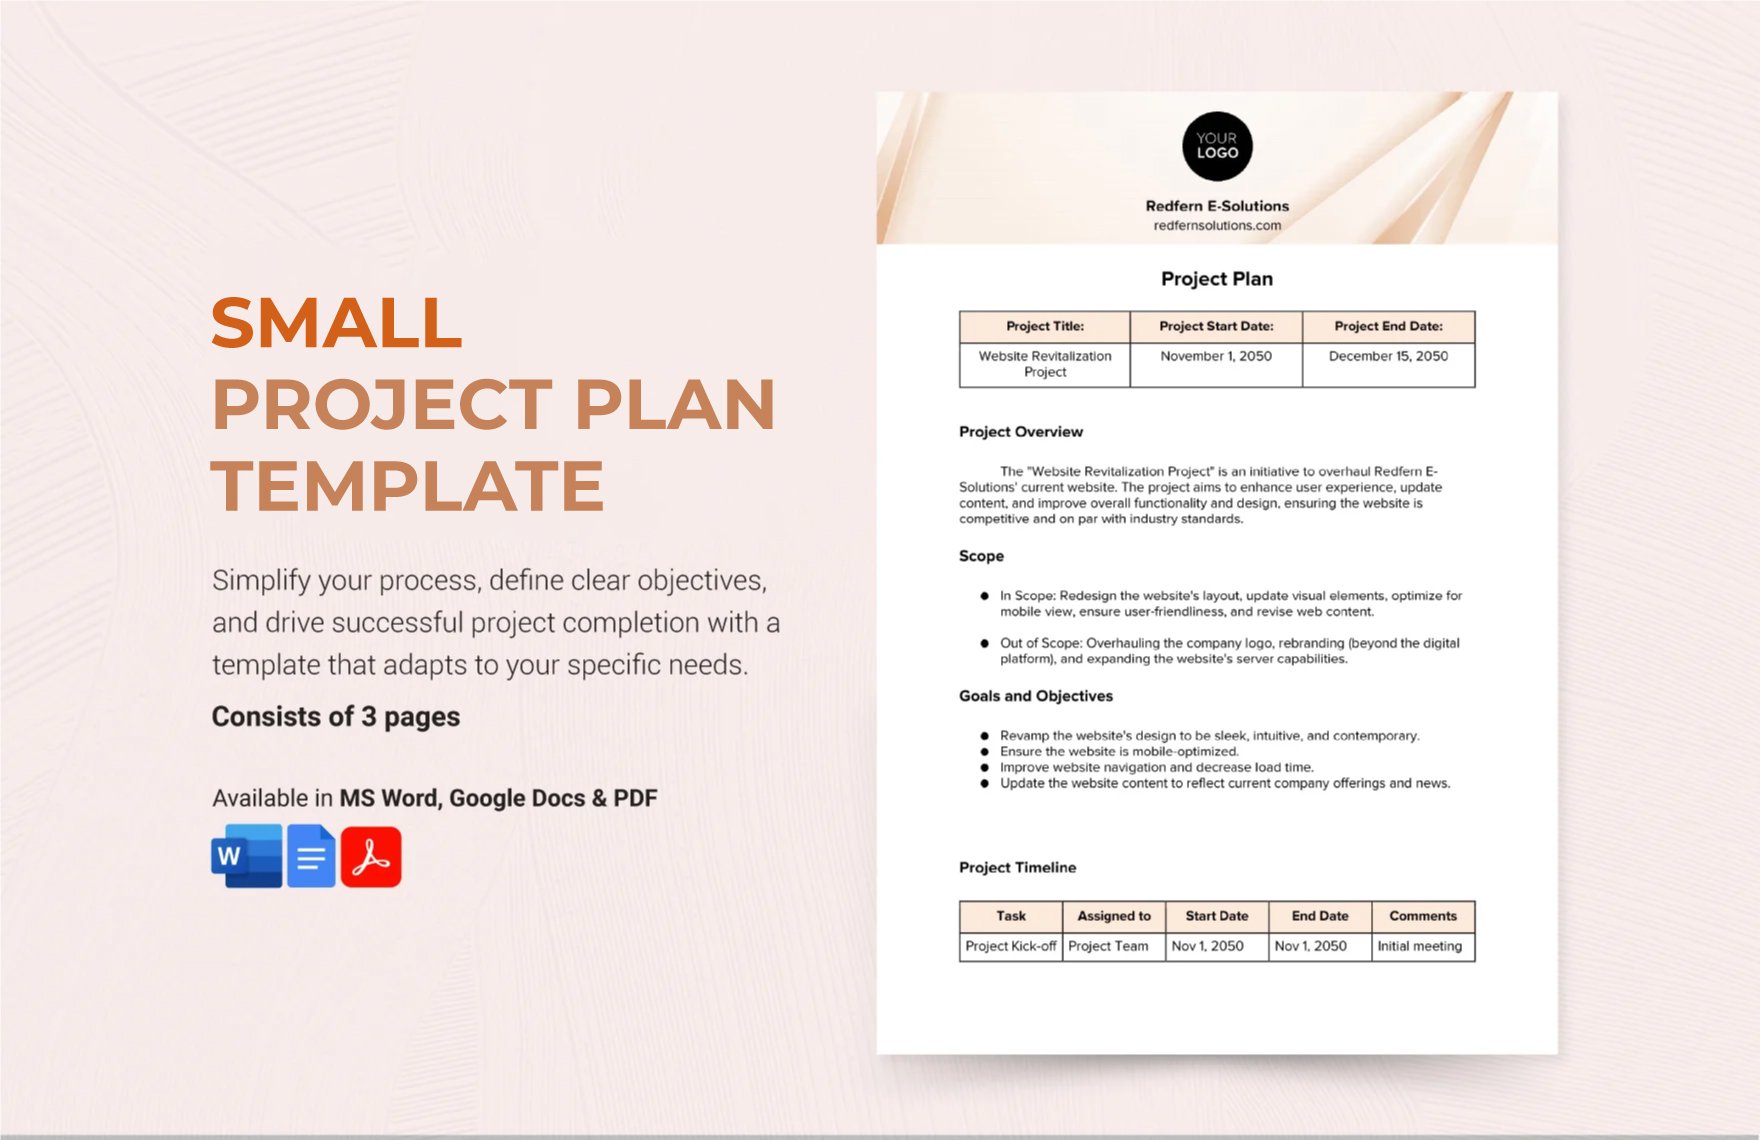 Small Project Plan Template